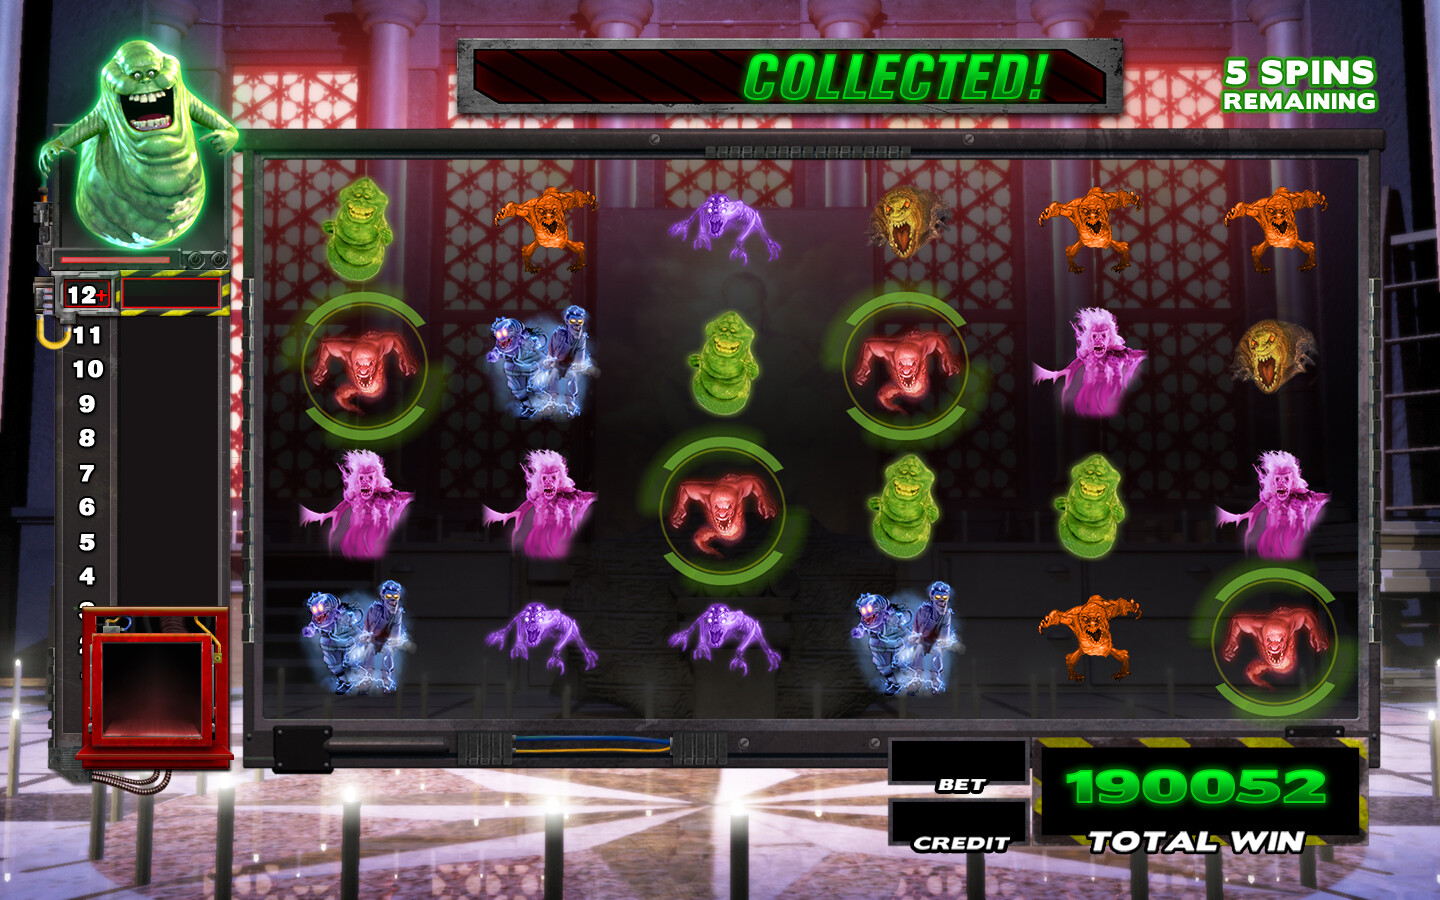 Ghostbusters Slot Machine game Top screen